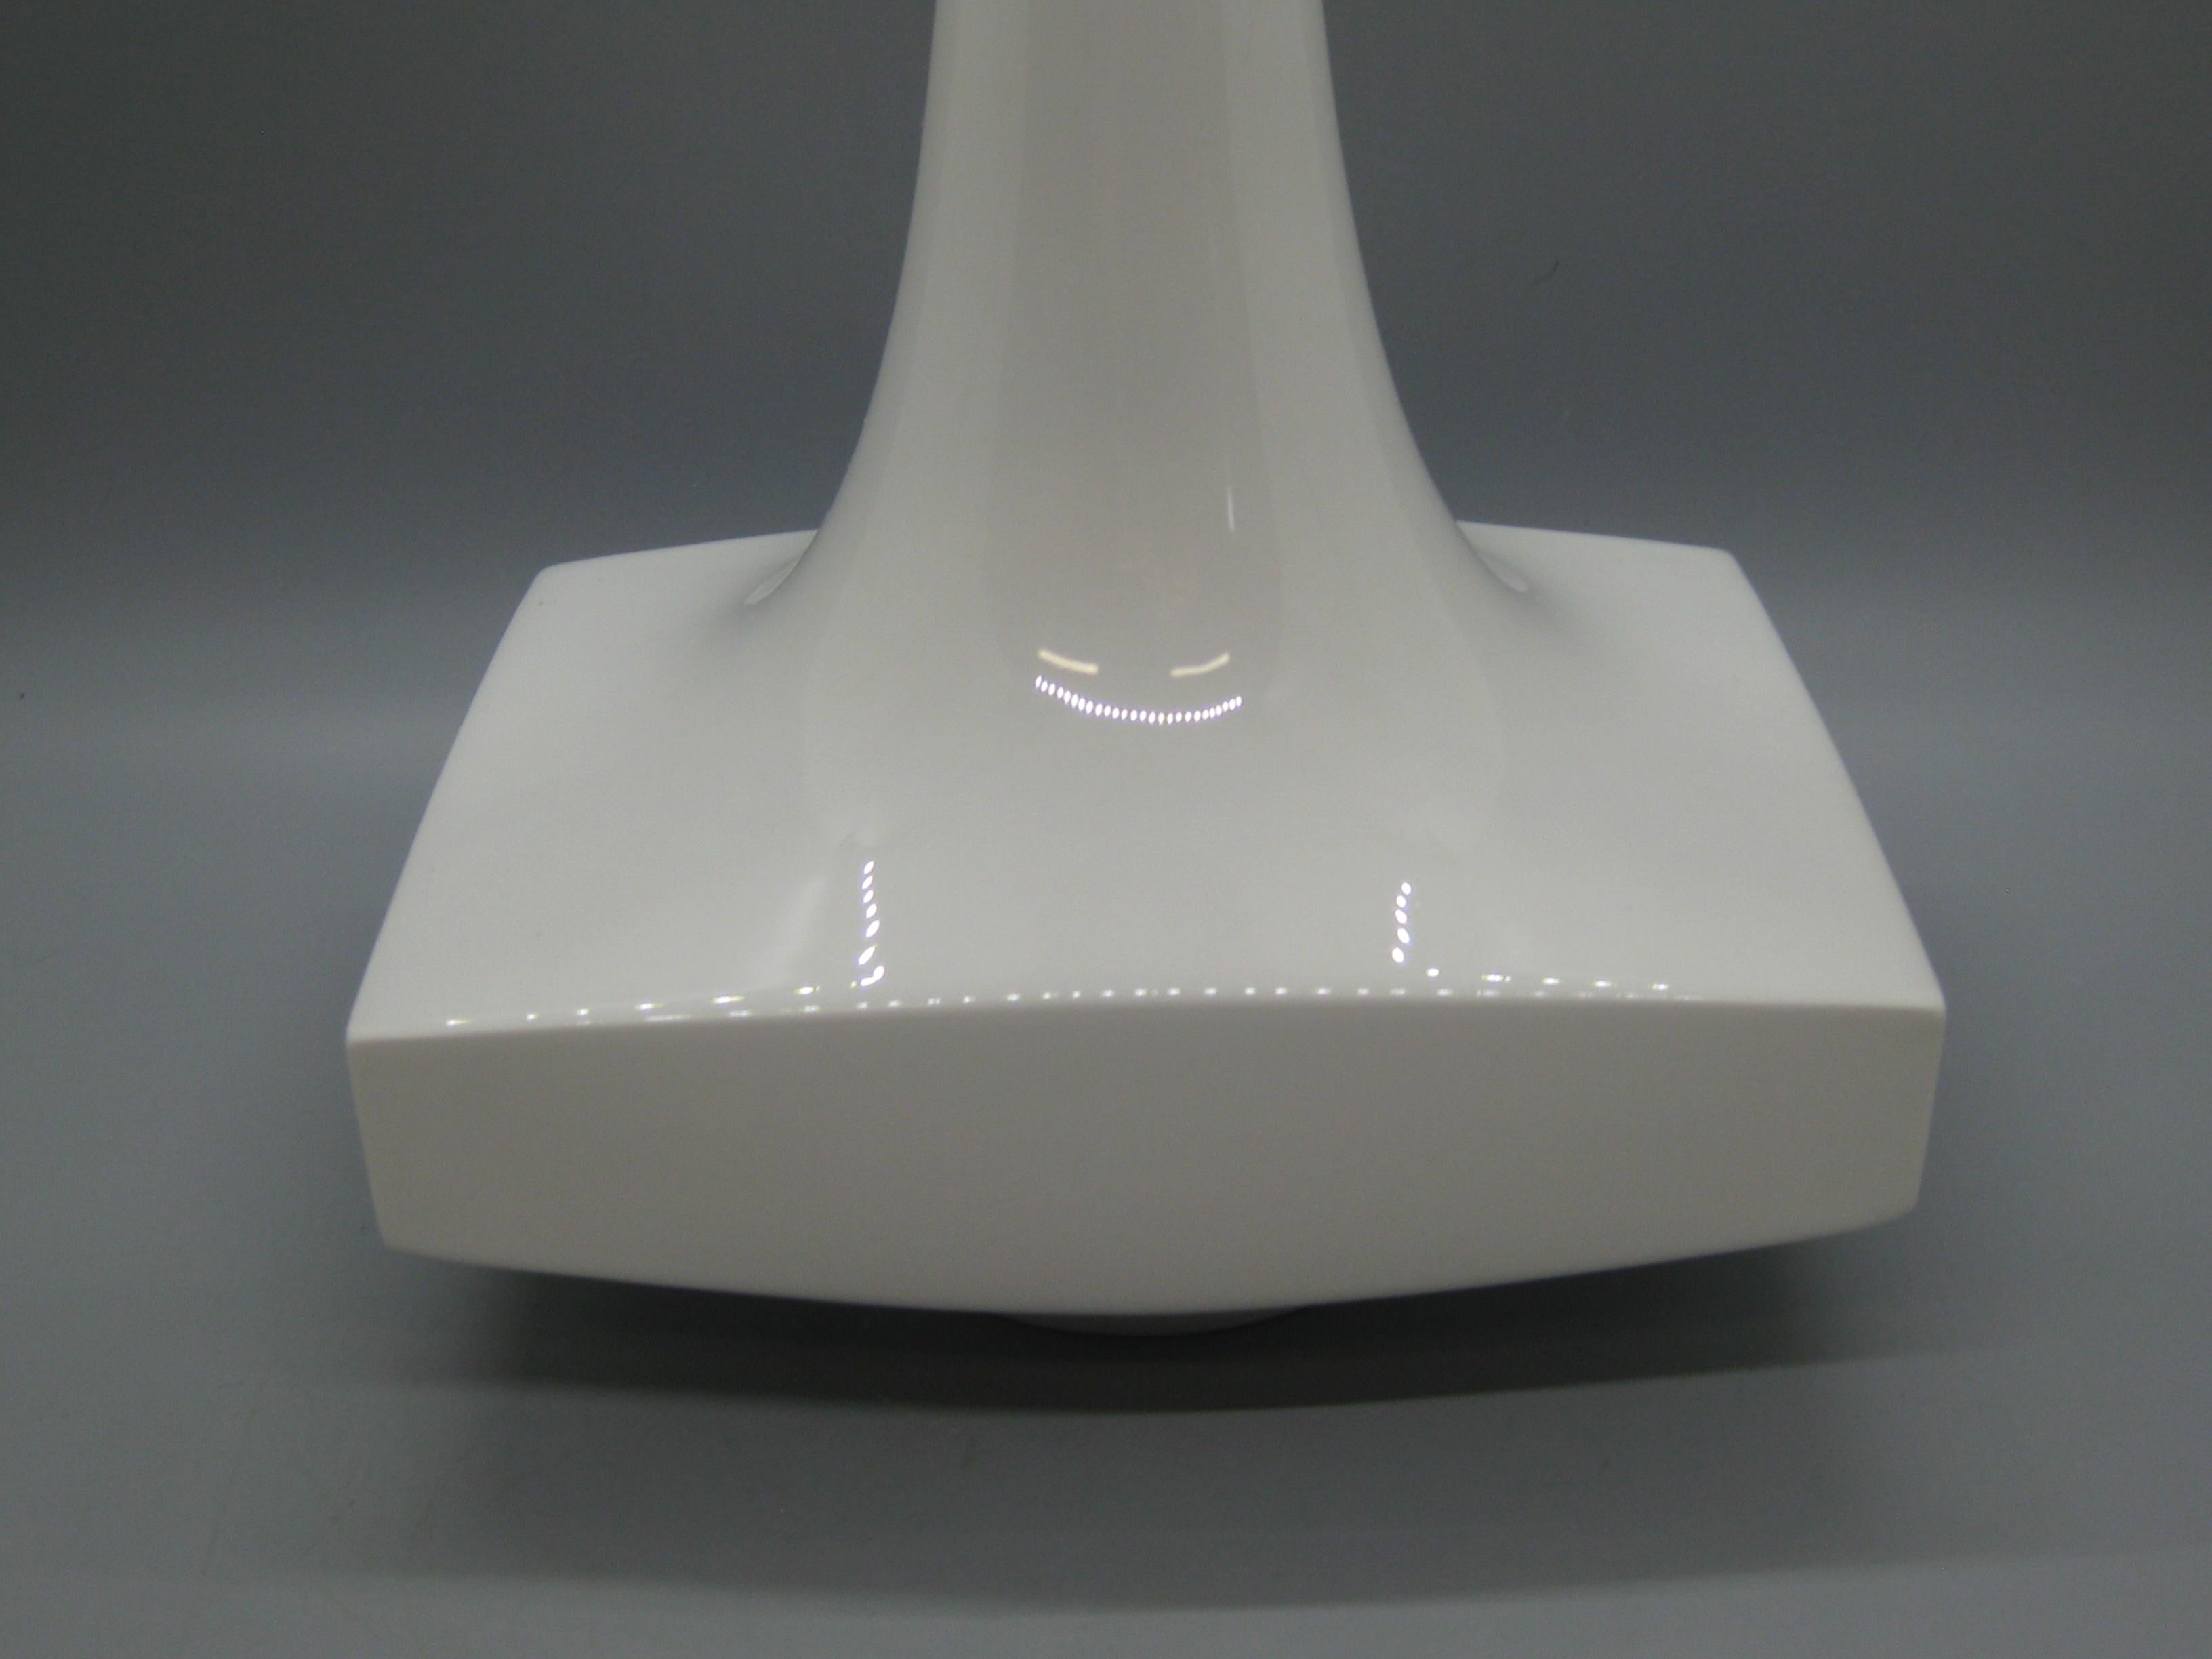 1950s Modernist KPM Porcelain Berlin Abstract Art Vase, Germany In Excellent Condition For Sale In San Diego, CA